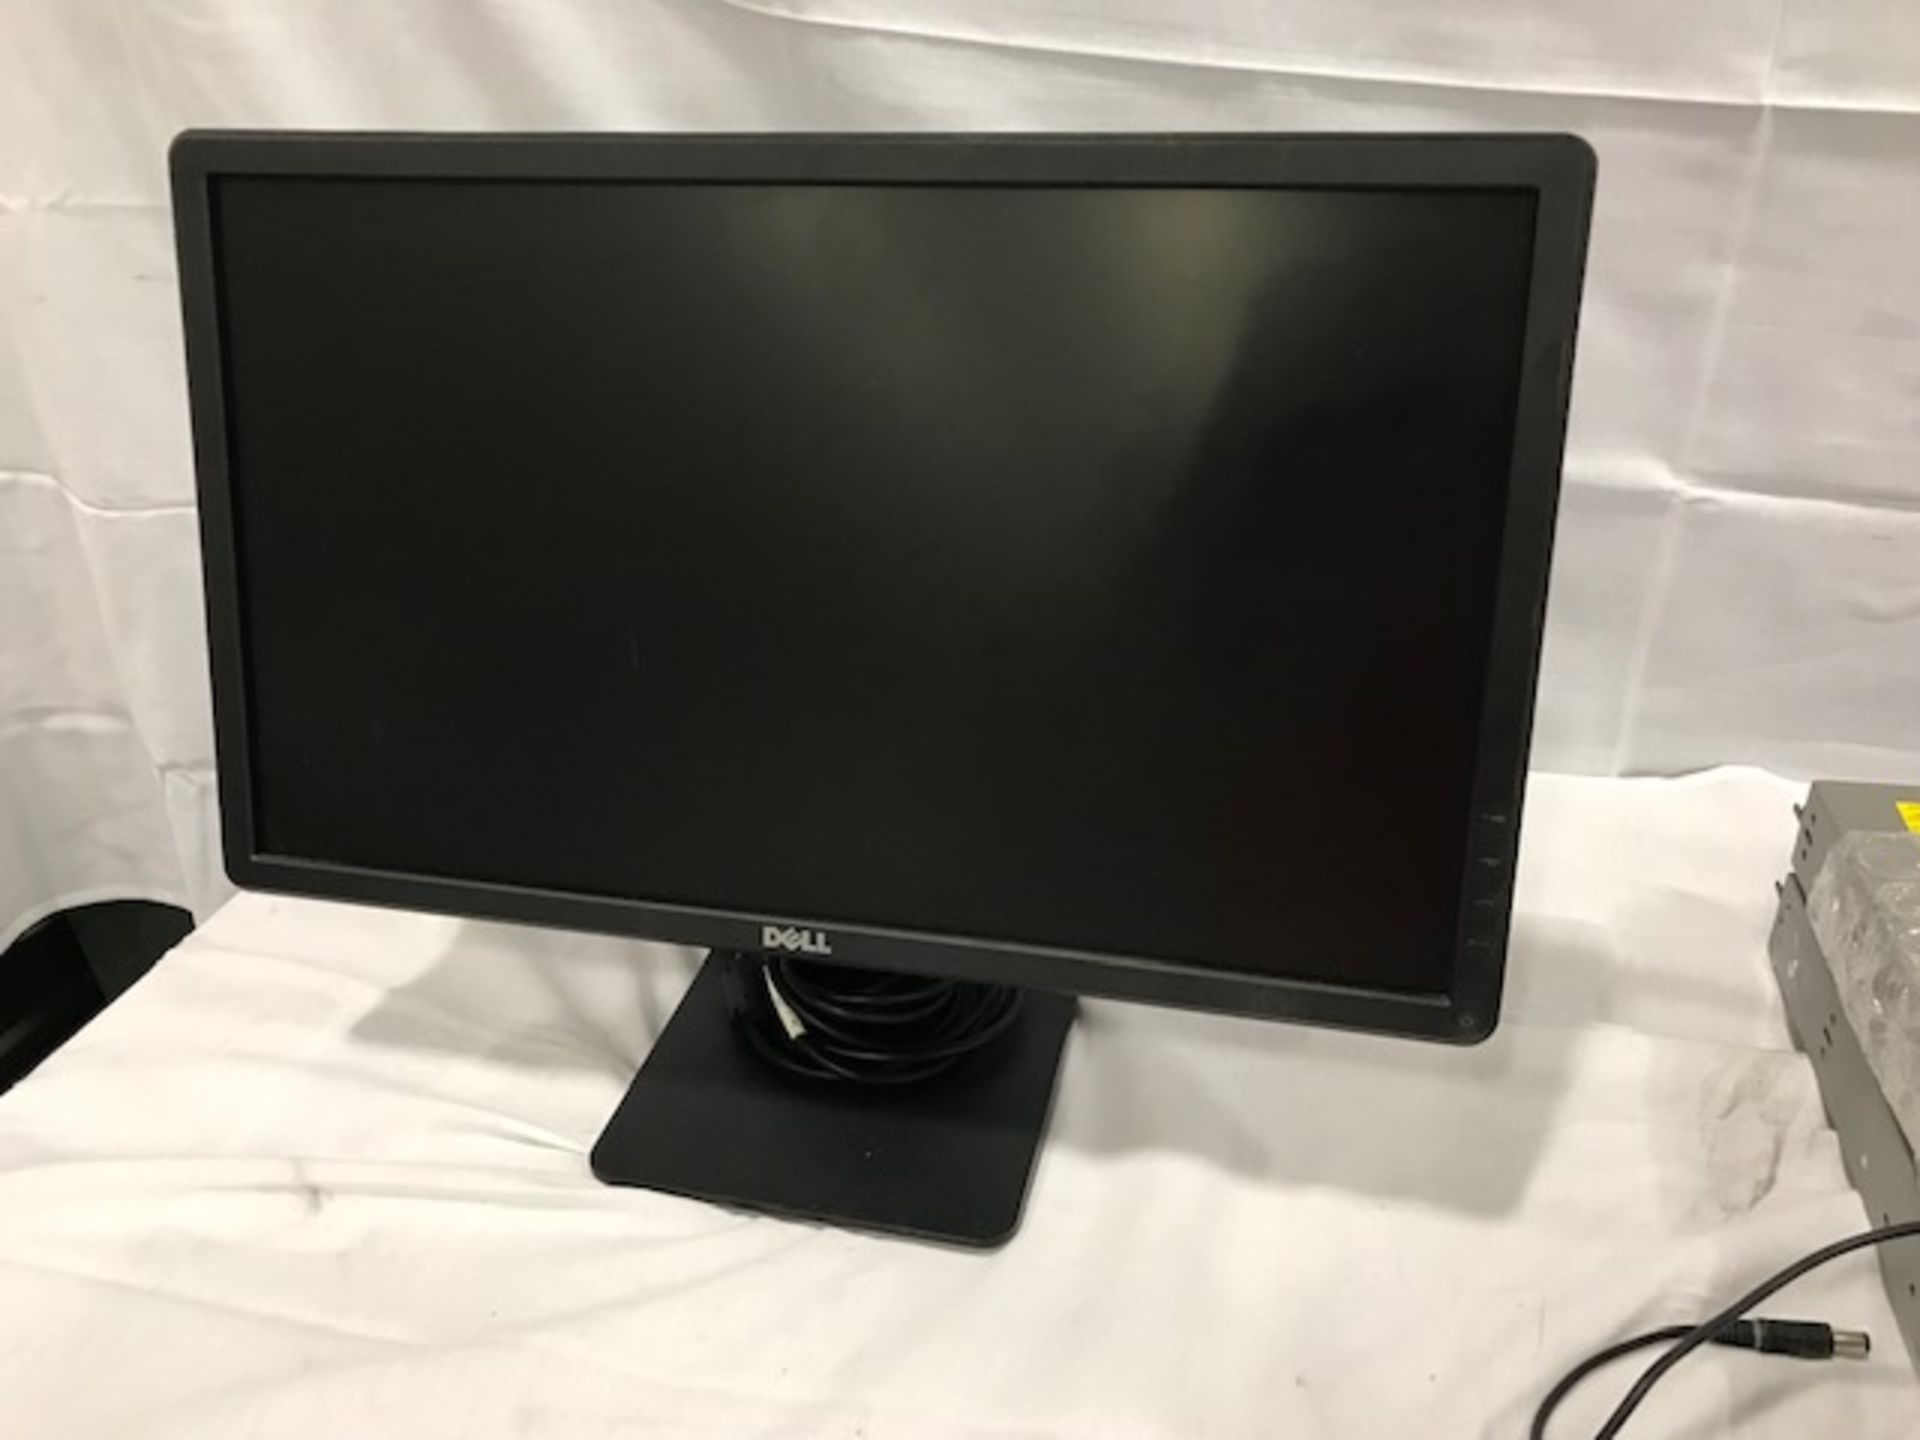 Dell Professional P1914S 19" LED Backlit Monitor